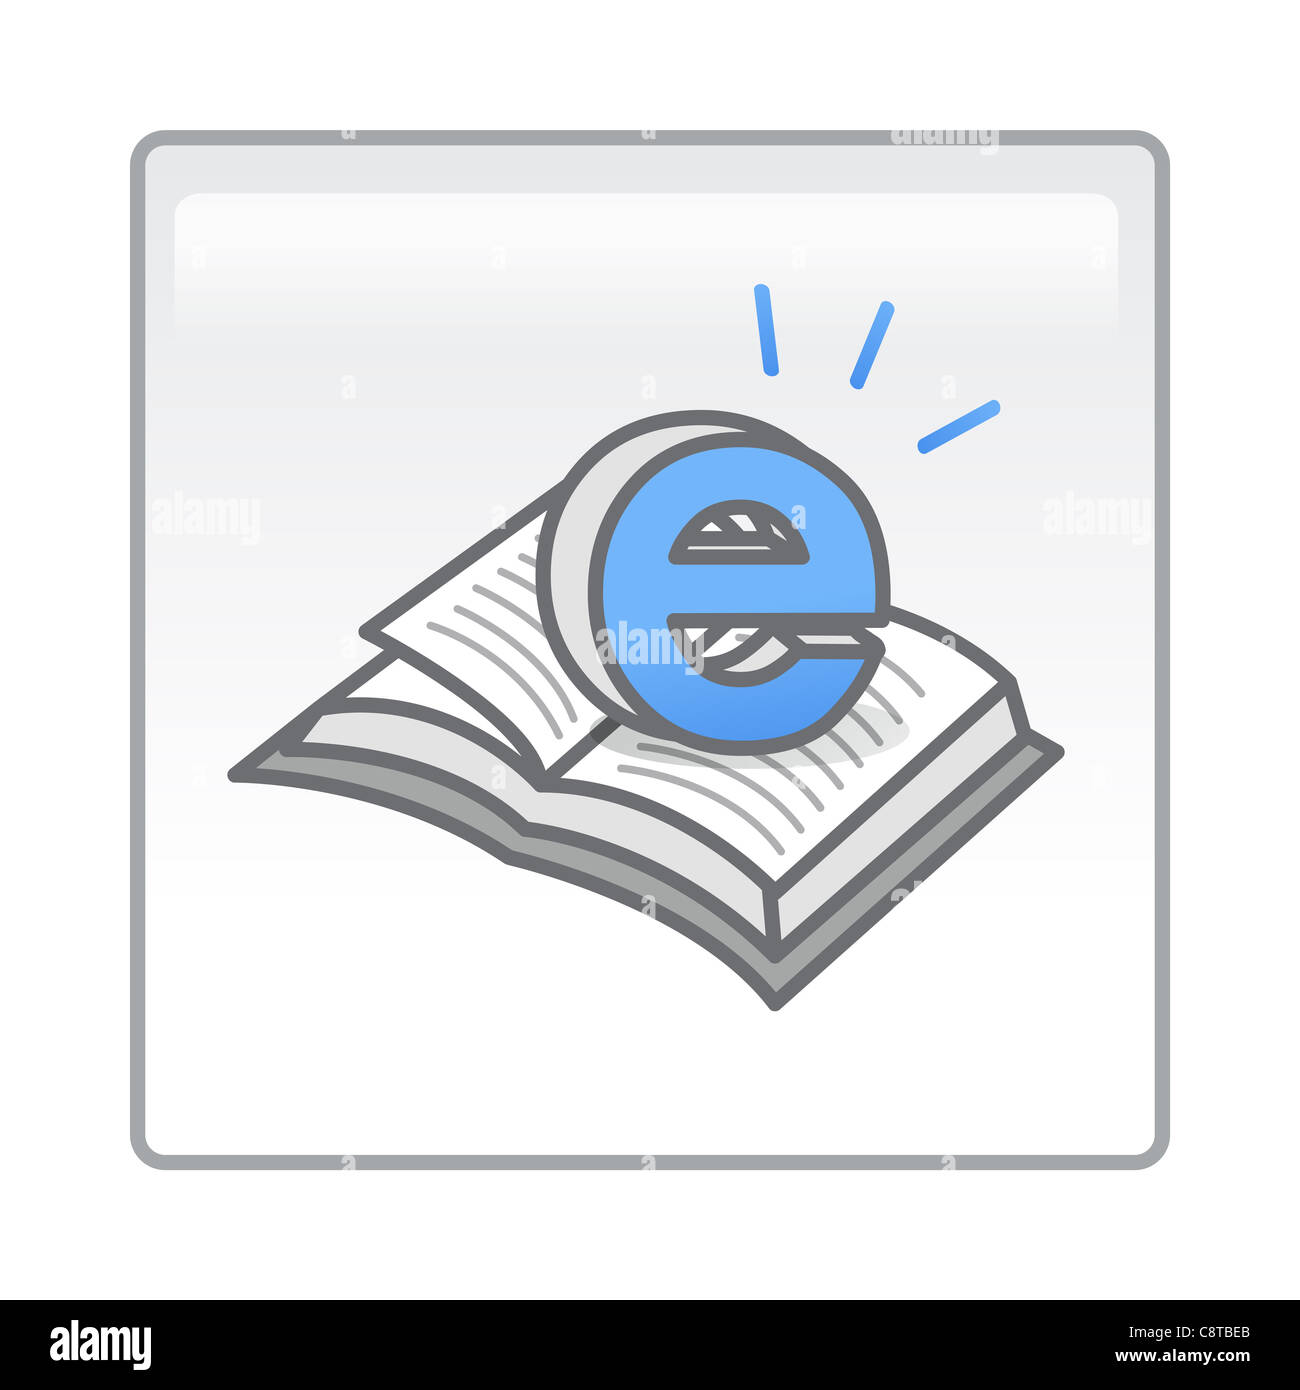 Illustration of internet and book Stock Photo